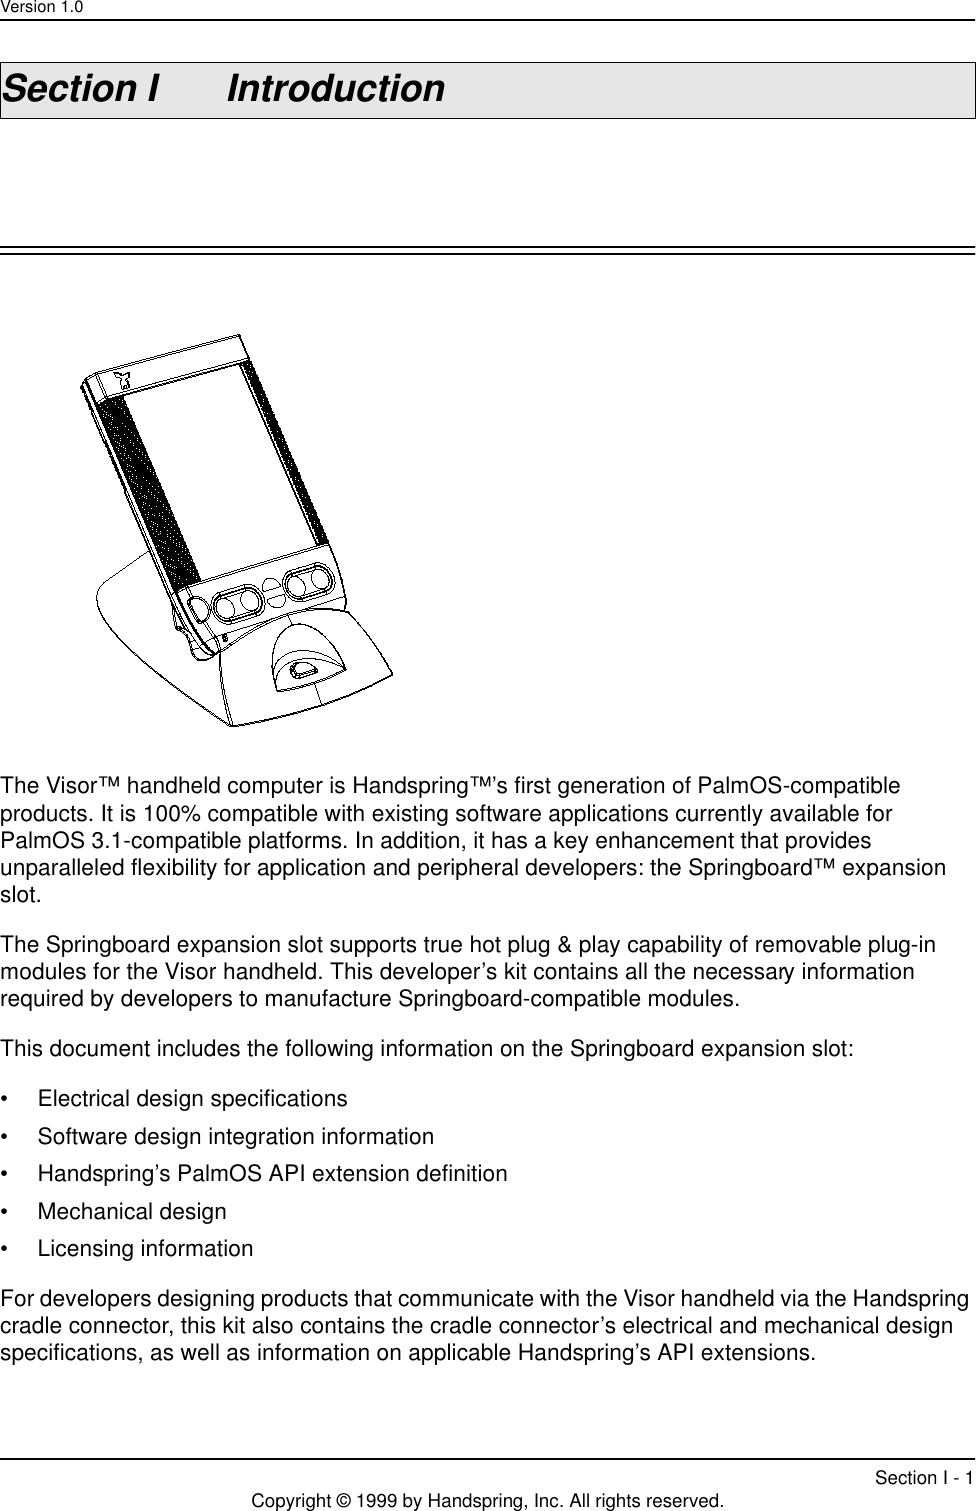 Version 1.0Section I - 1Copyright © 1999 by Handspring, Inc. All rights reserved.Section I IntroductionThe Visor™ handheld computer is Handspring™’s first generation of PalmOS-compatible products. It is 100% compatible with existing software applications currently available for PalmOS 3.1-compatible platforms. In addition, it has a key enhancement that provides unparalleled flexibility for application and peripheral developers: the Springboard™ expansion slot.The Springboard expansion slot supports true hot plug &amp; play capability of removable plug-in modules for the Visor handheld. This developer’s kit contains all the necessary information required by developers to manufacture Springboard-compatible modules.This document includes the following information on the Springboard expansion slot:• Electrical design specifications• Software design integration information• Handspring’s PalmOS API extension definition• Mechanical design• Licensing informationFor developers designing products that communicate with the Visor handheld via the Handspring cradle connector, this kit also contains the cradle connector’s electrical and mechanical design specifications, as well as information on applicable Handspring’s API extensions. 